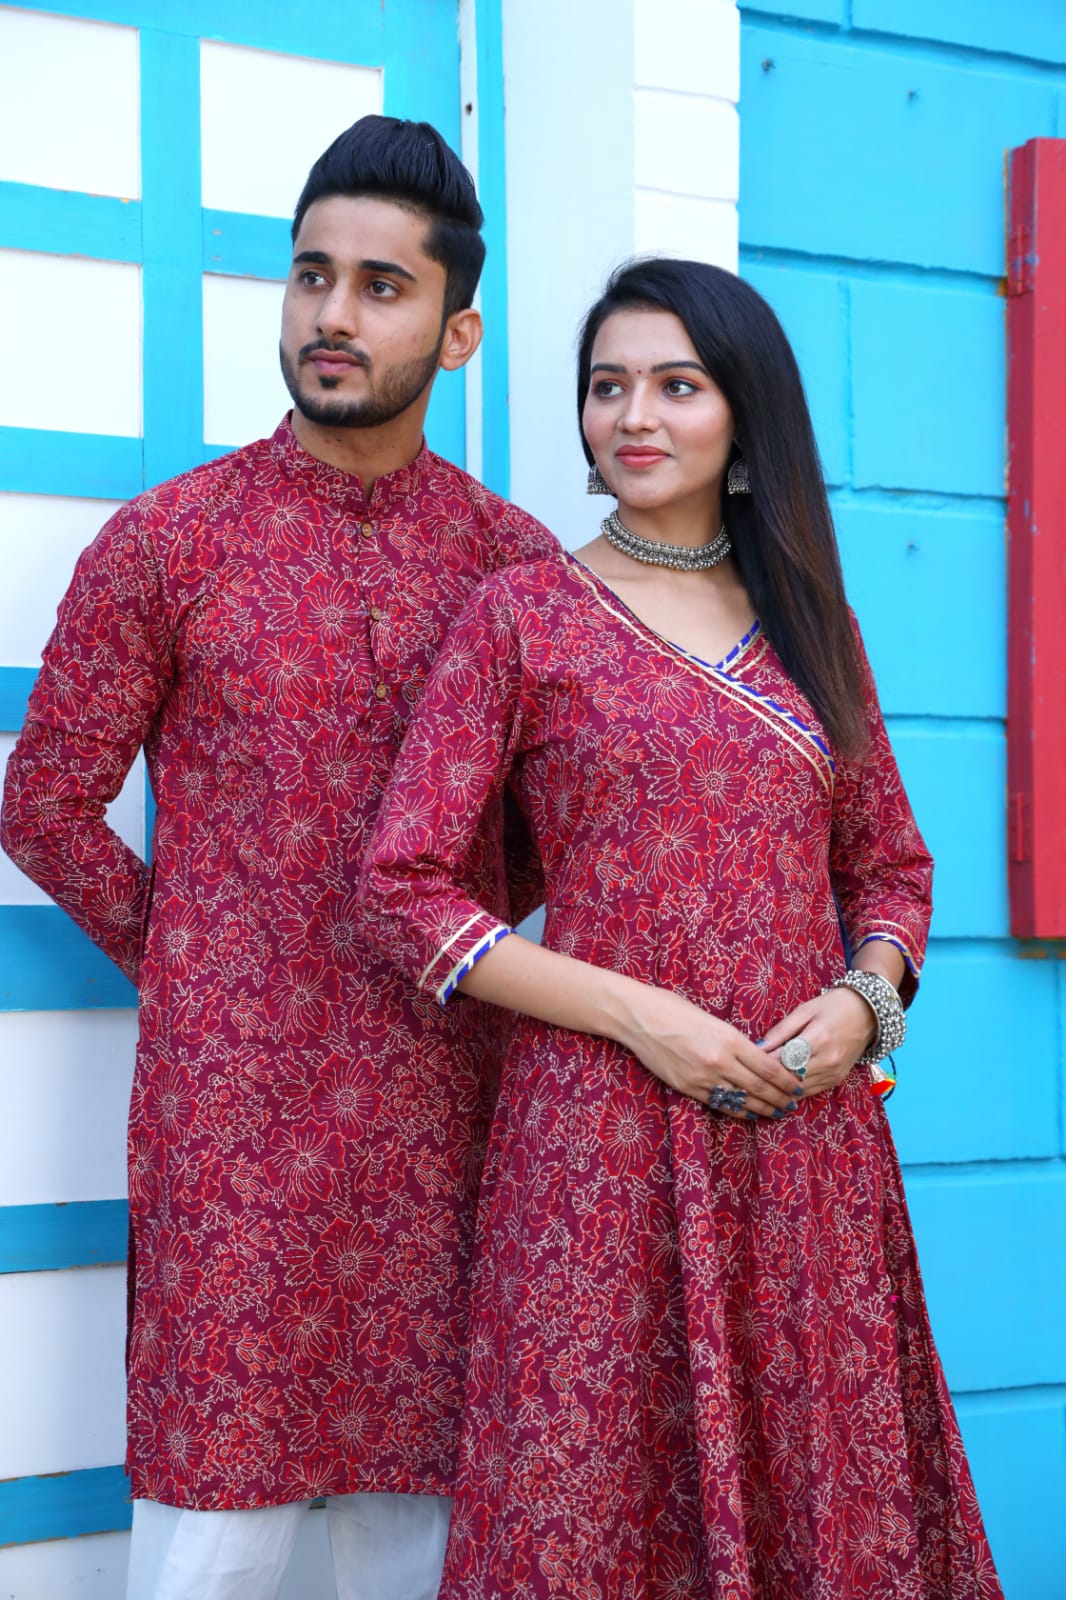 Couple Formal Outfits. Matching Summer Linen Outfits for Couples. –  Vyshyvanka by Masik Valeriy